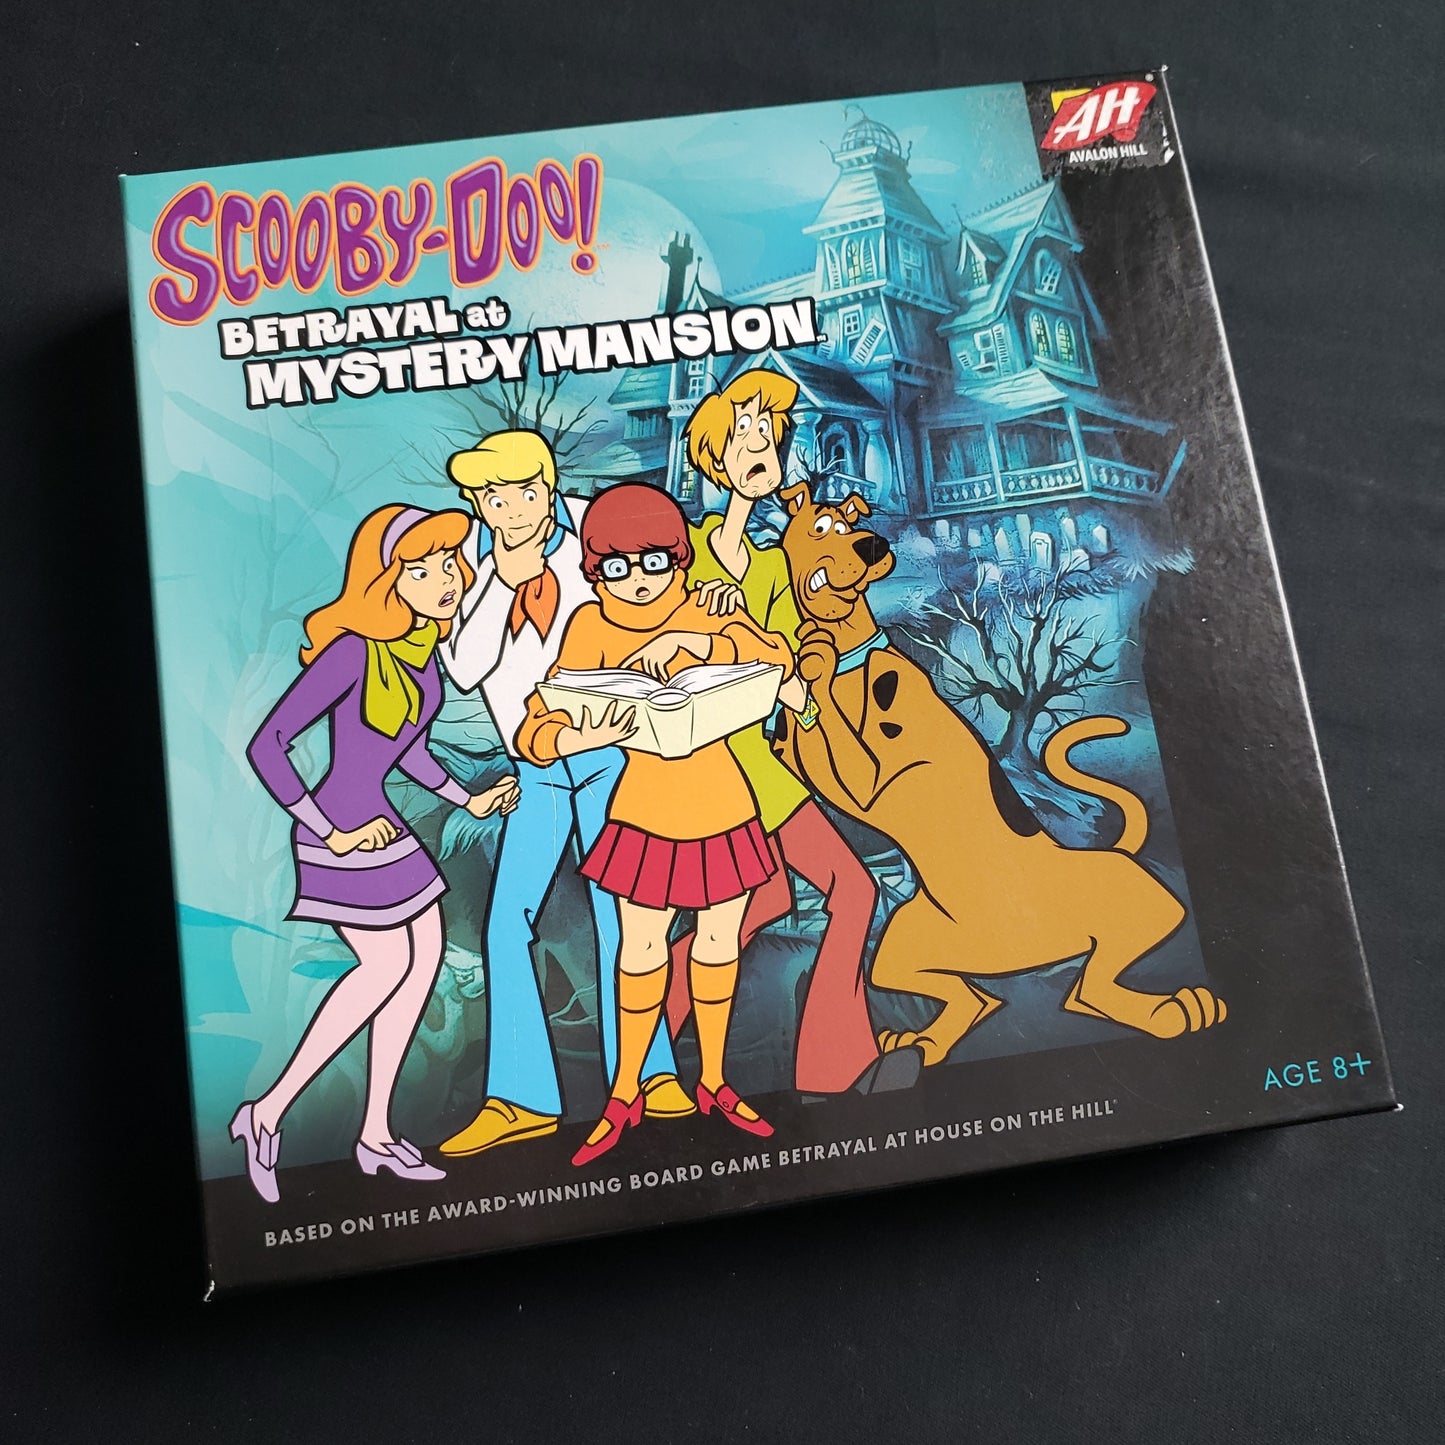 Image shows the front cover of the box of the Scooby Doo: Betrayal at Mystery Mansion board game